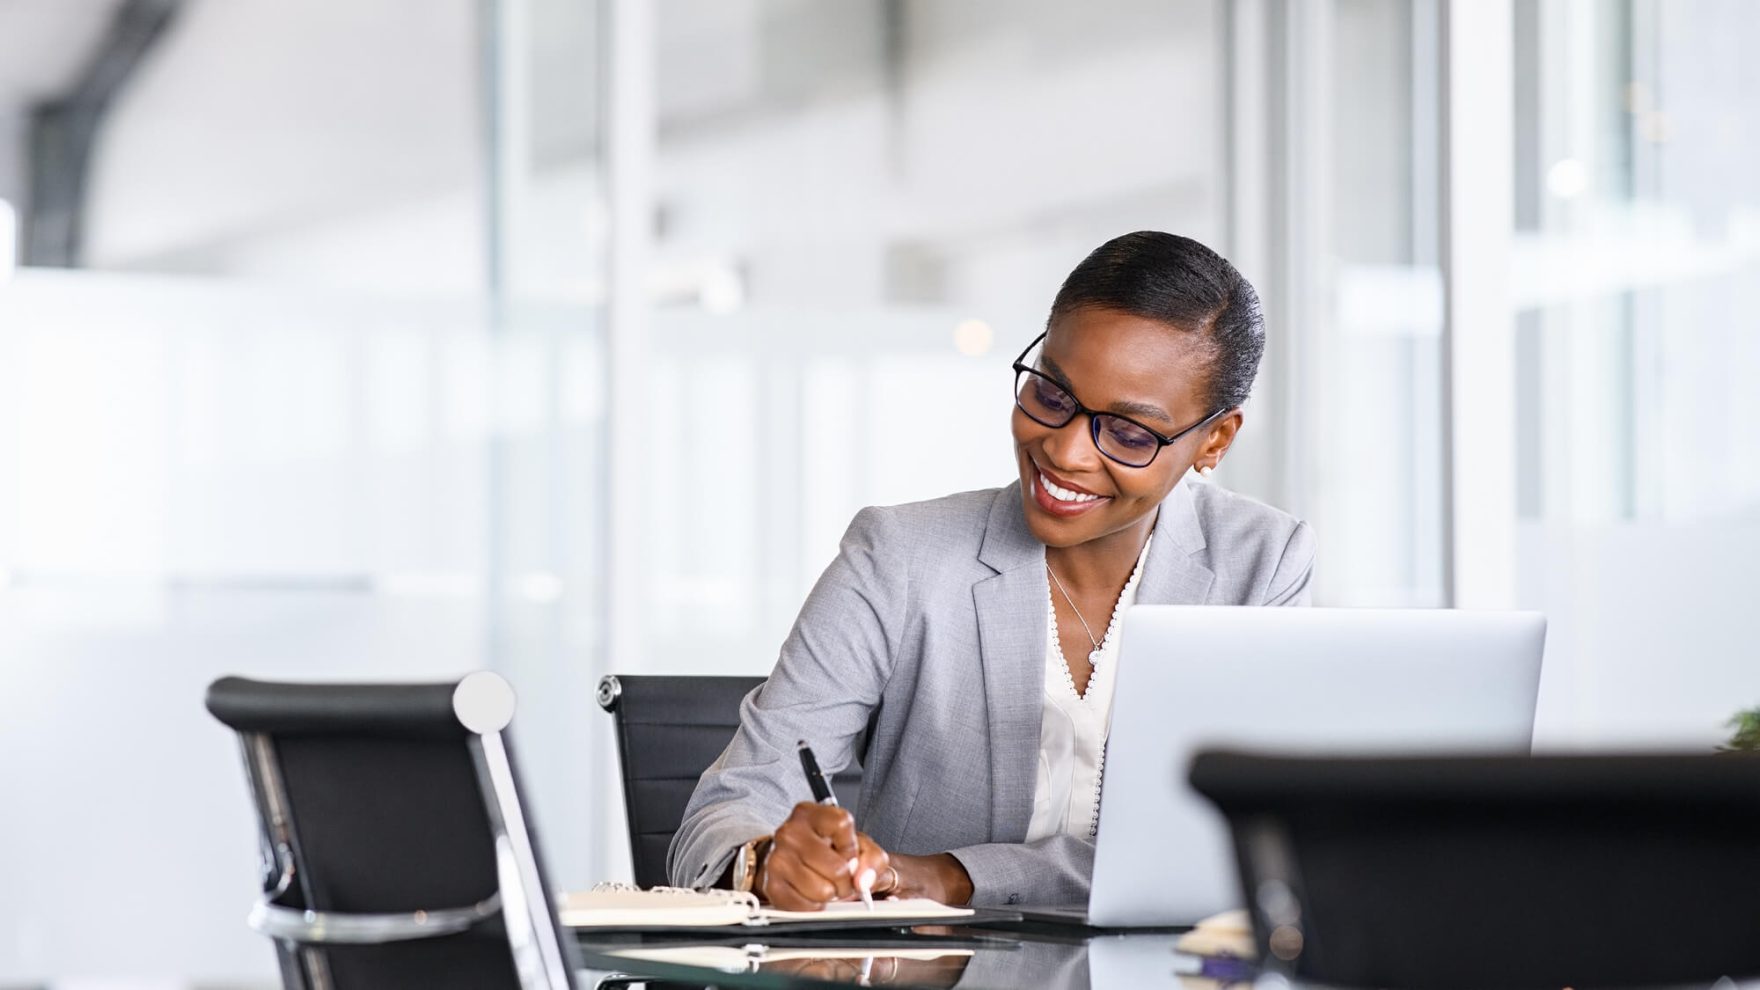 Business woman taking notes: Explore the Ph.D in Business Administration online.